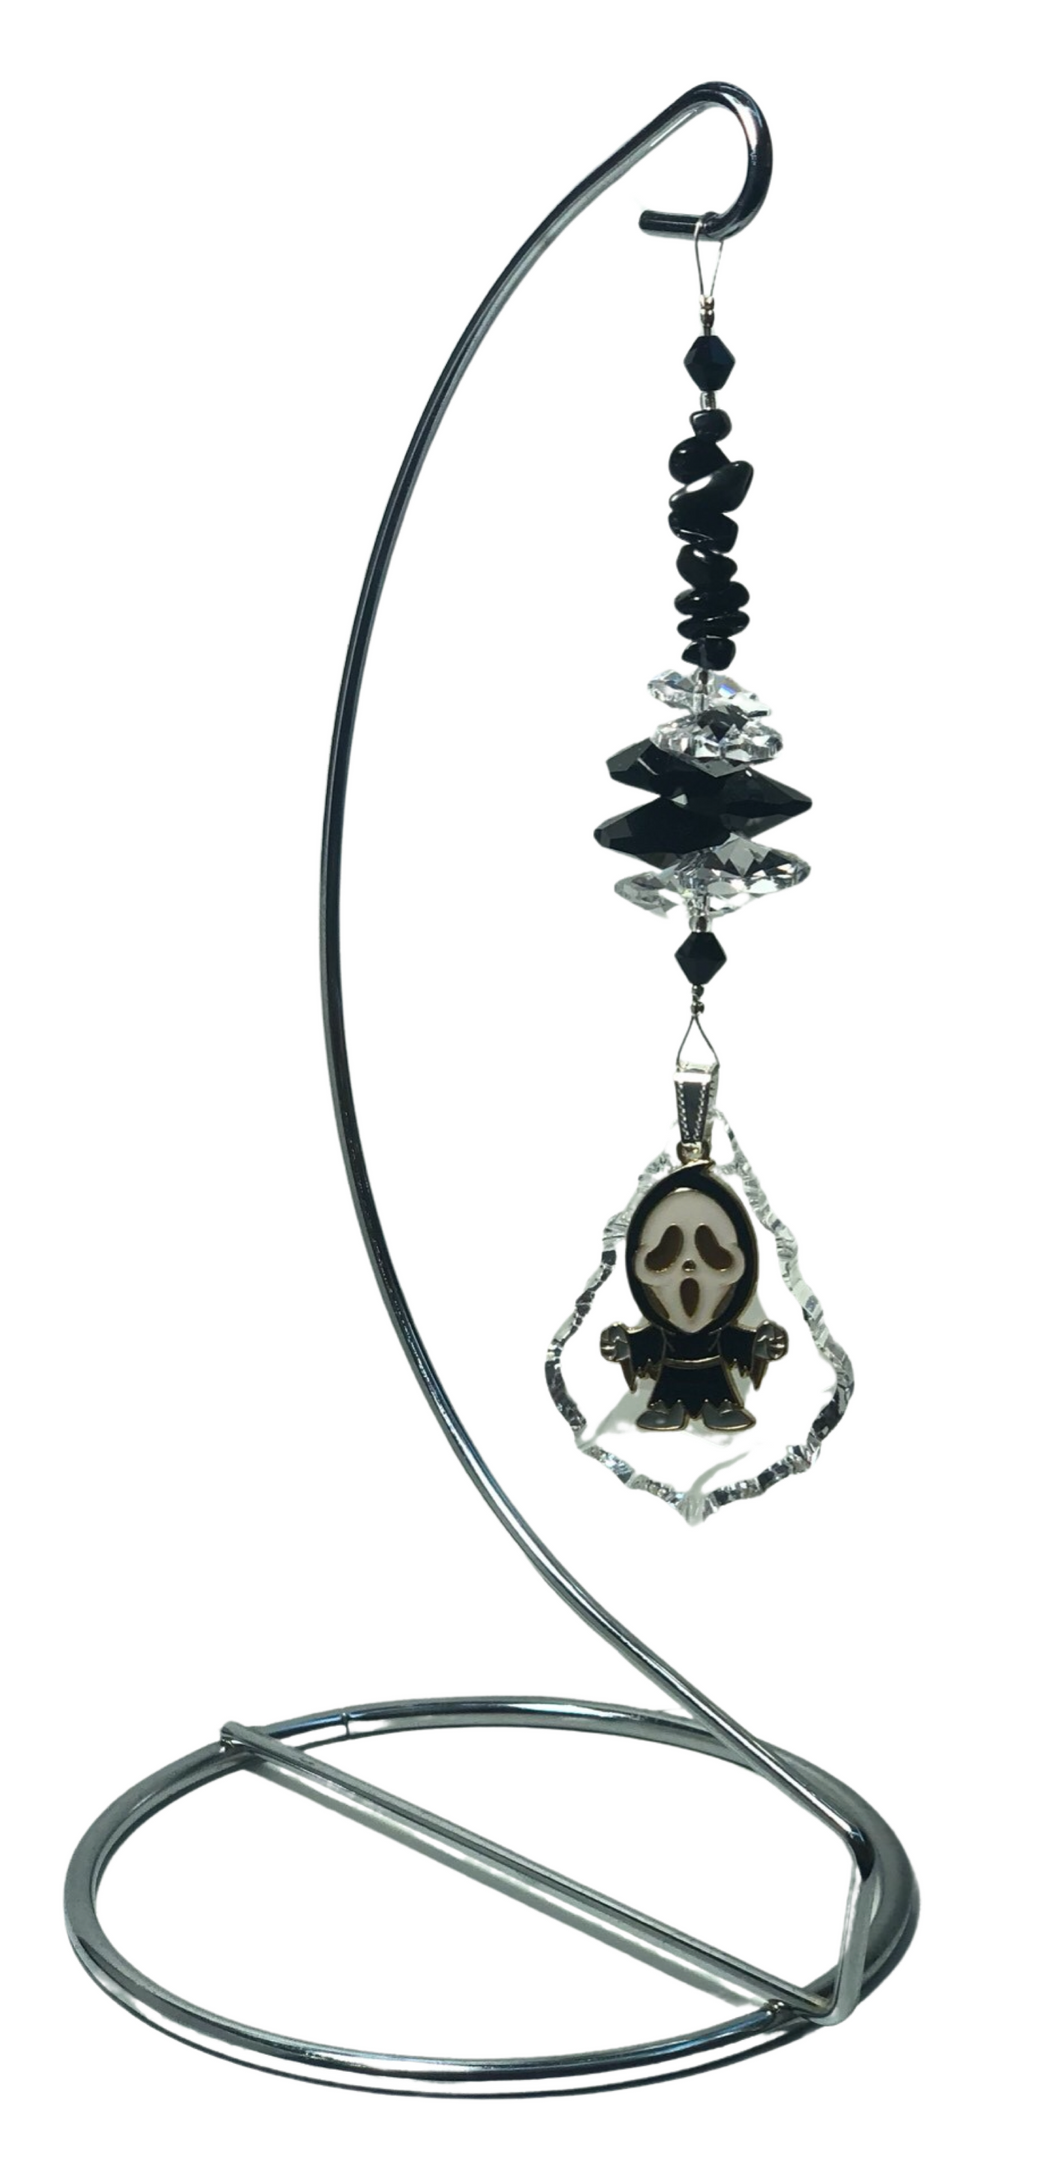 Ghost Face crystal suncatcher is decorated with snowflake obsidian gemstones and come on this amazing large stand